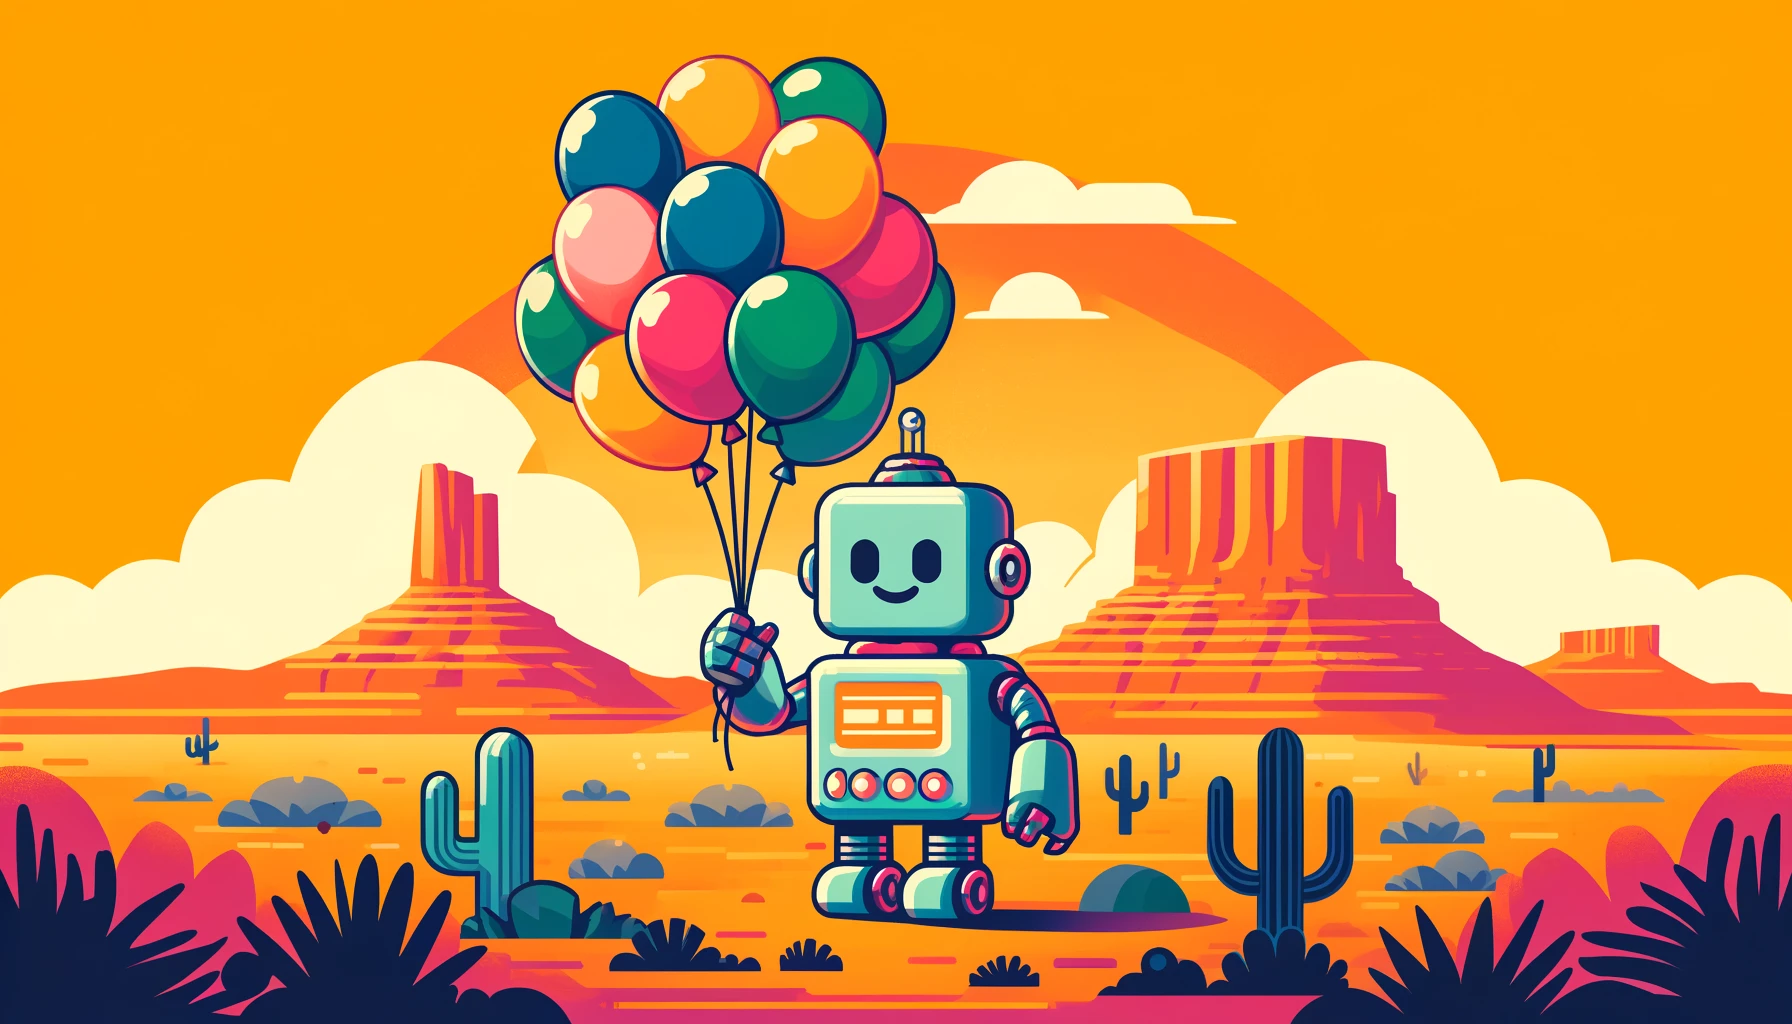 Robot with balloons for happy birthday with for special person